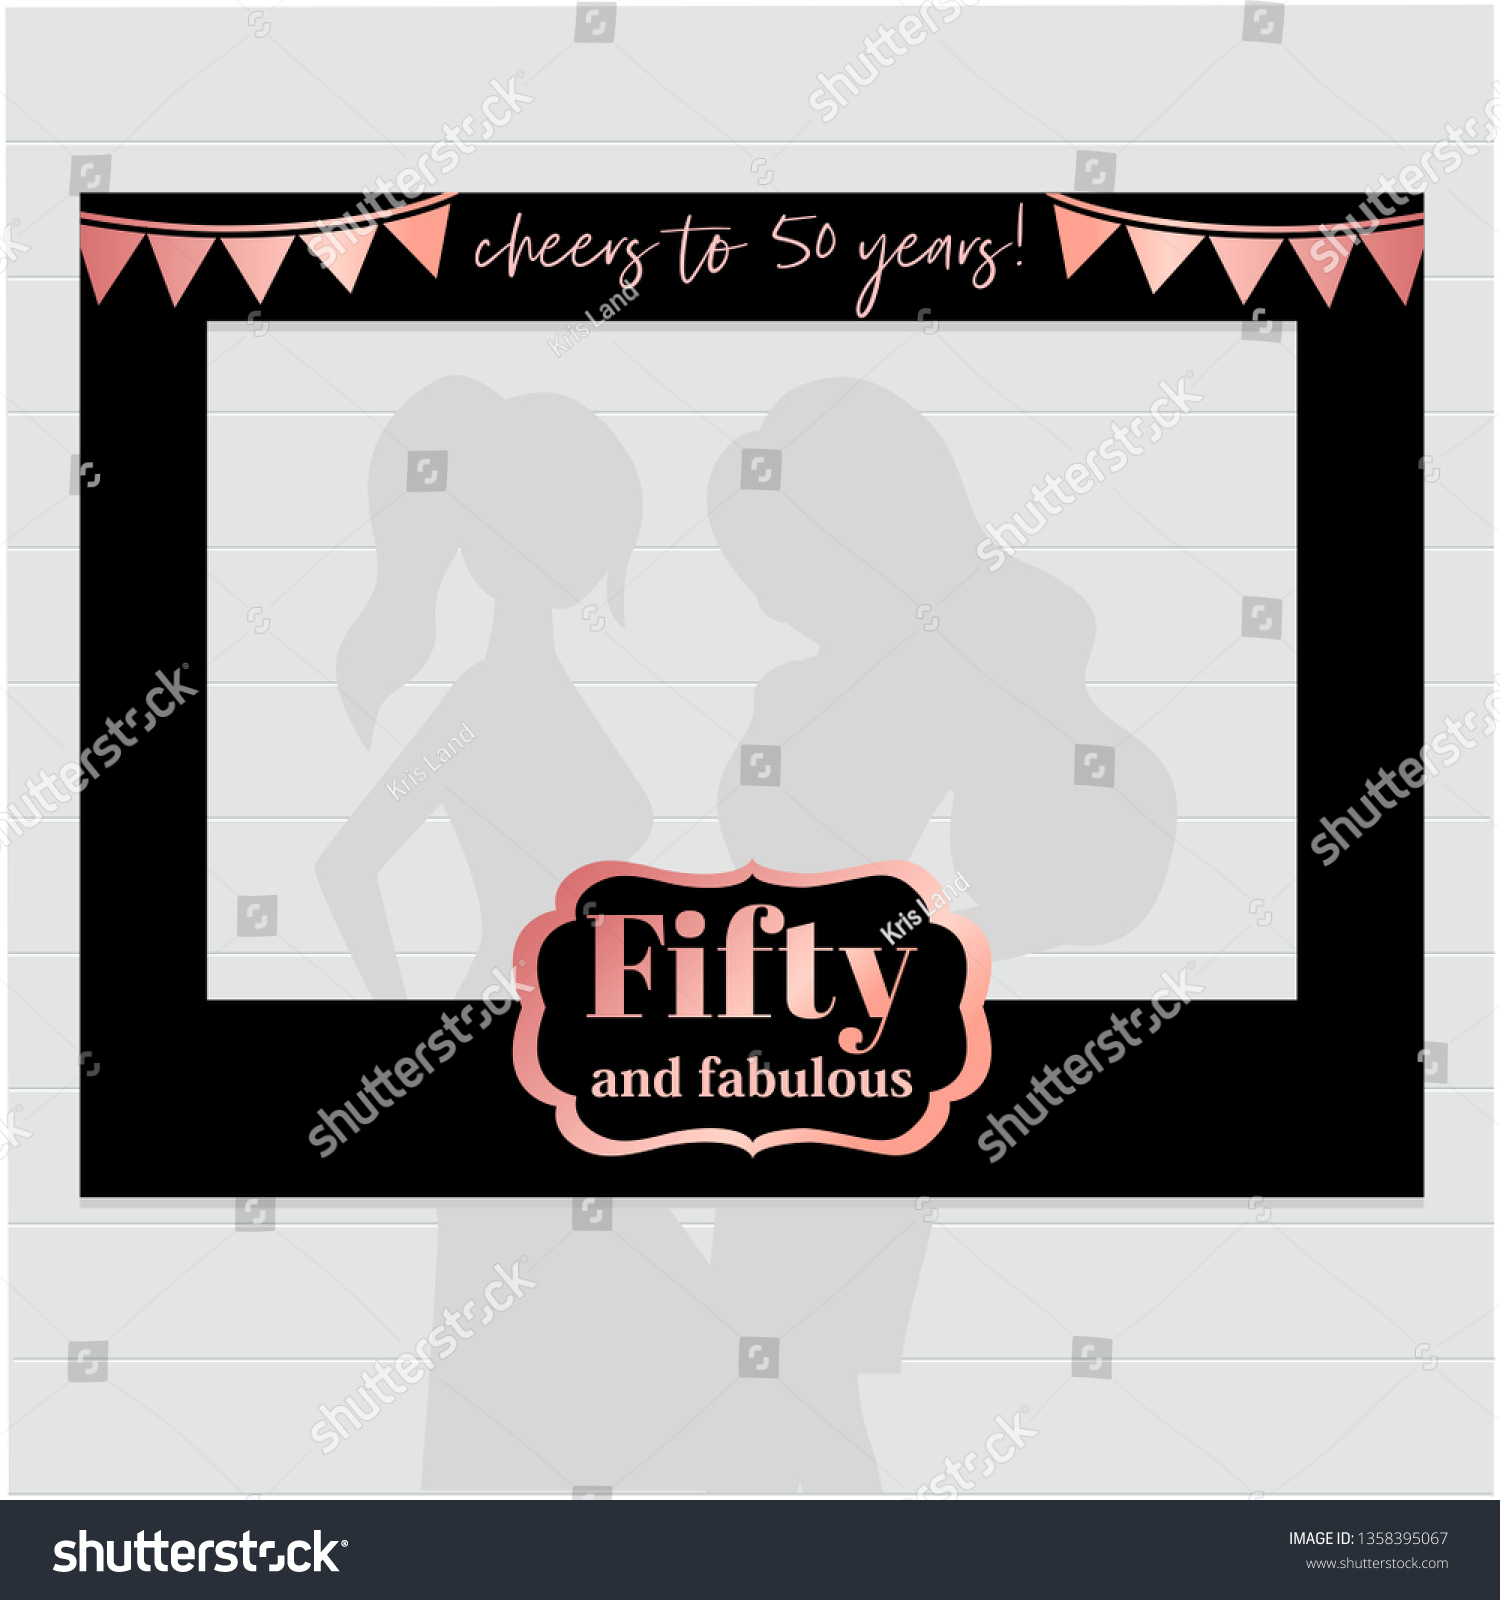 SVG of Fifty and fabulous - 50th birthday black and rose gold photo booth frame. Strike a Pose photoshooting with props on sticks. Vector template.
 svg